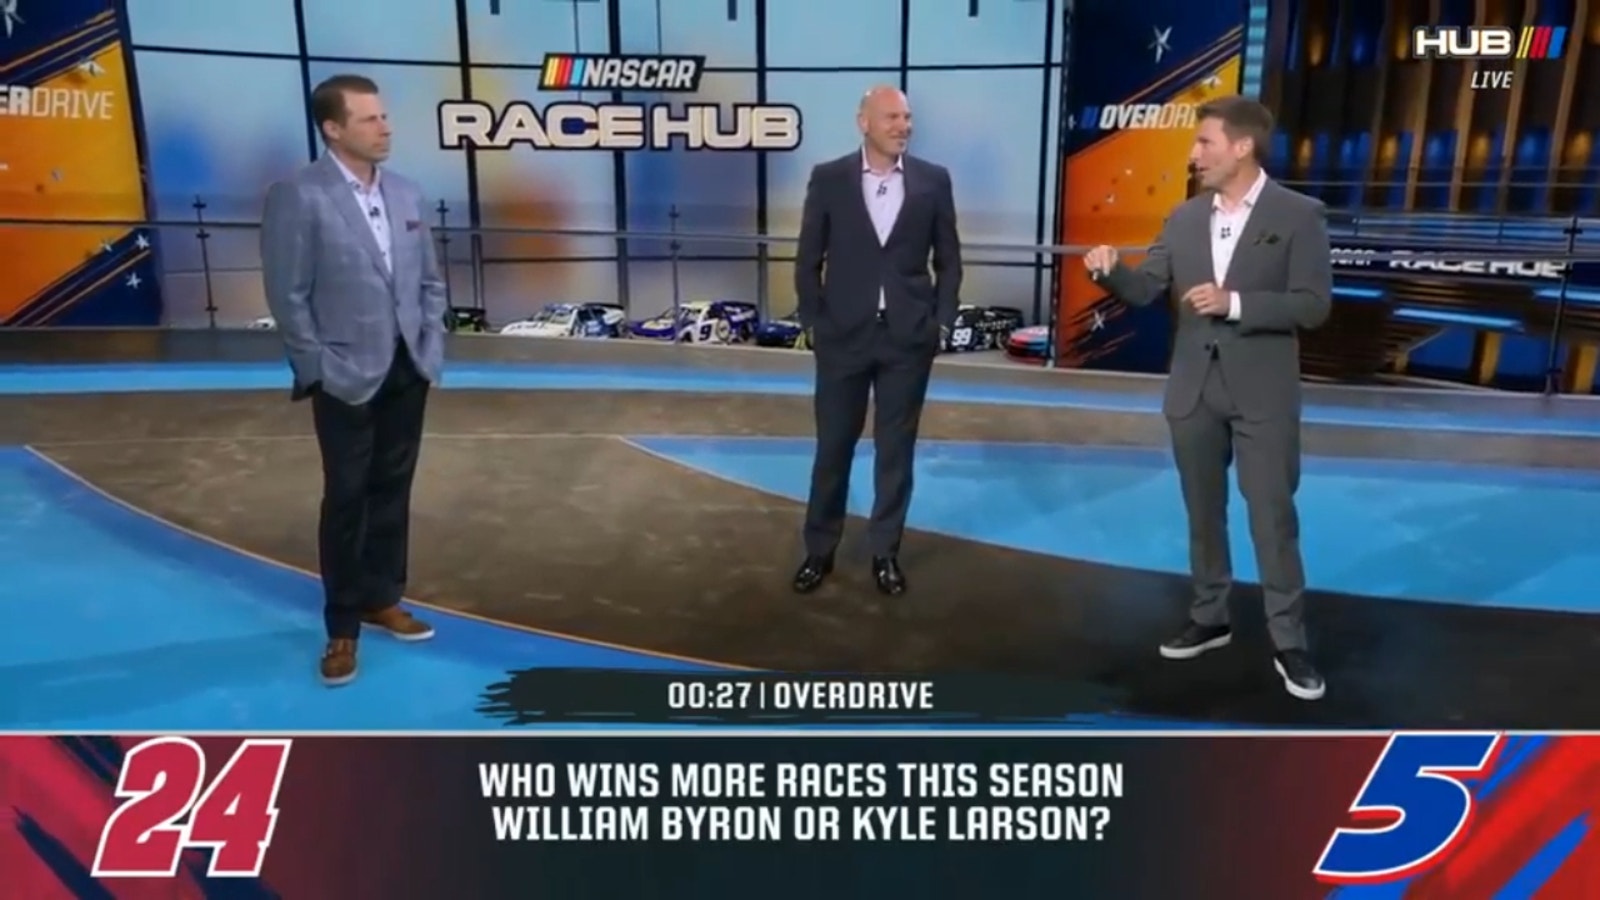 Kyle Larson or William Byron: Who wins more races this year? 